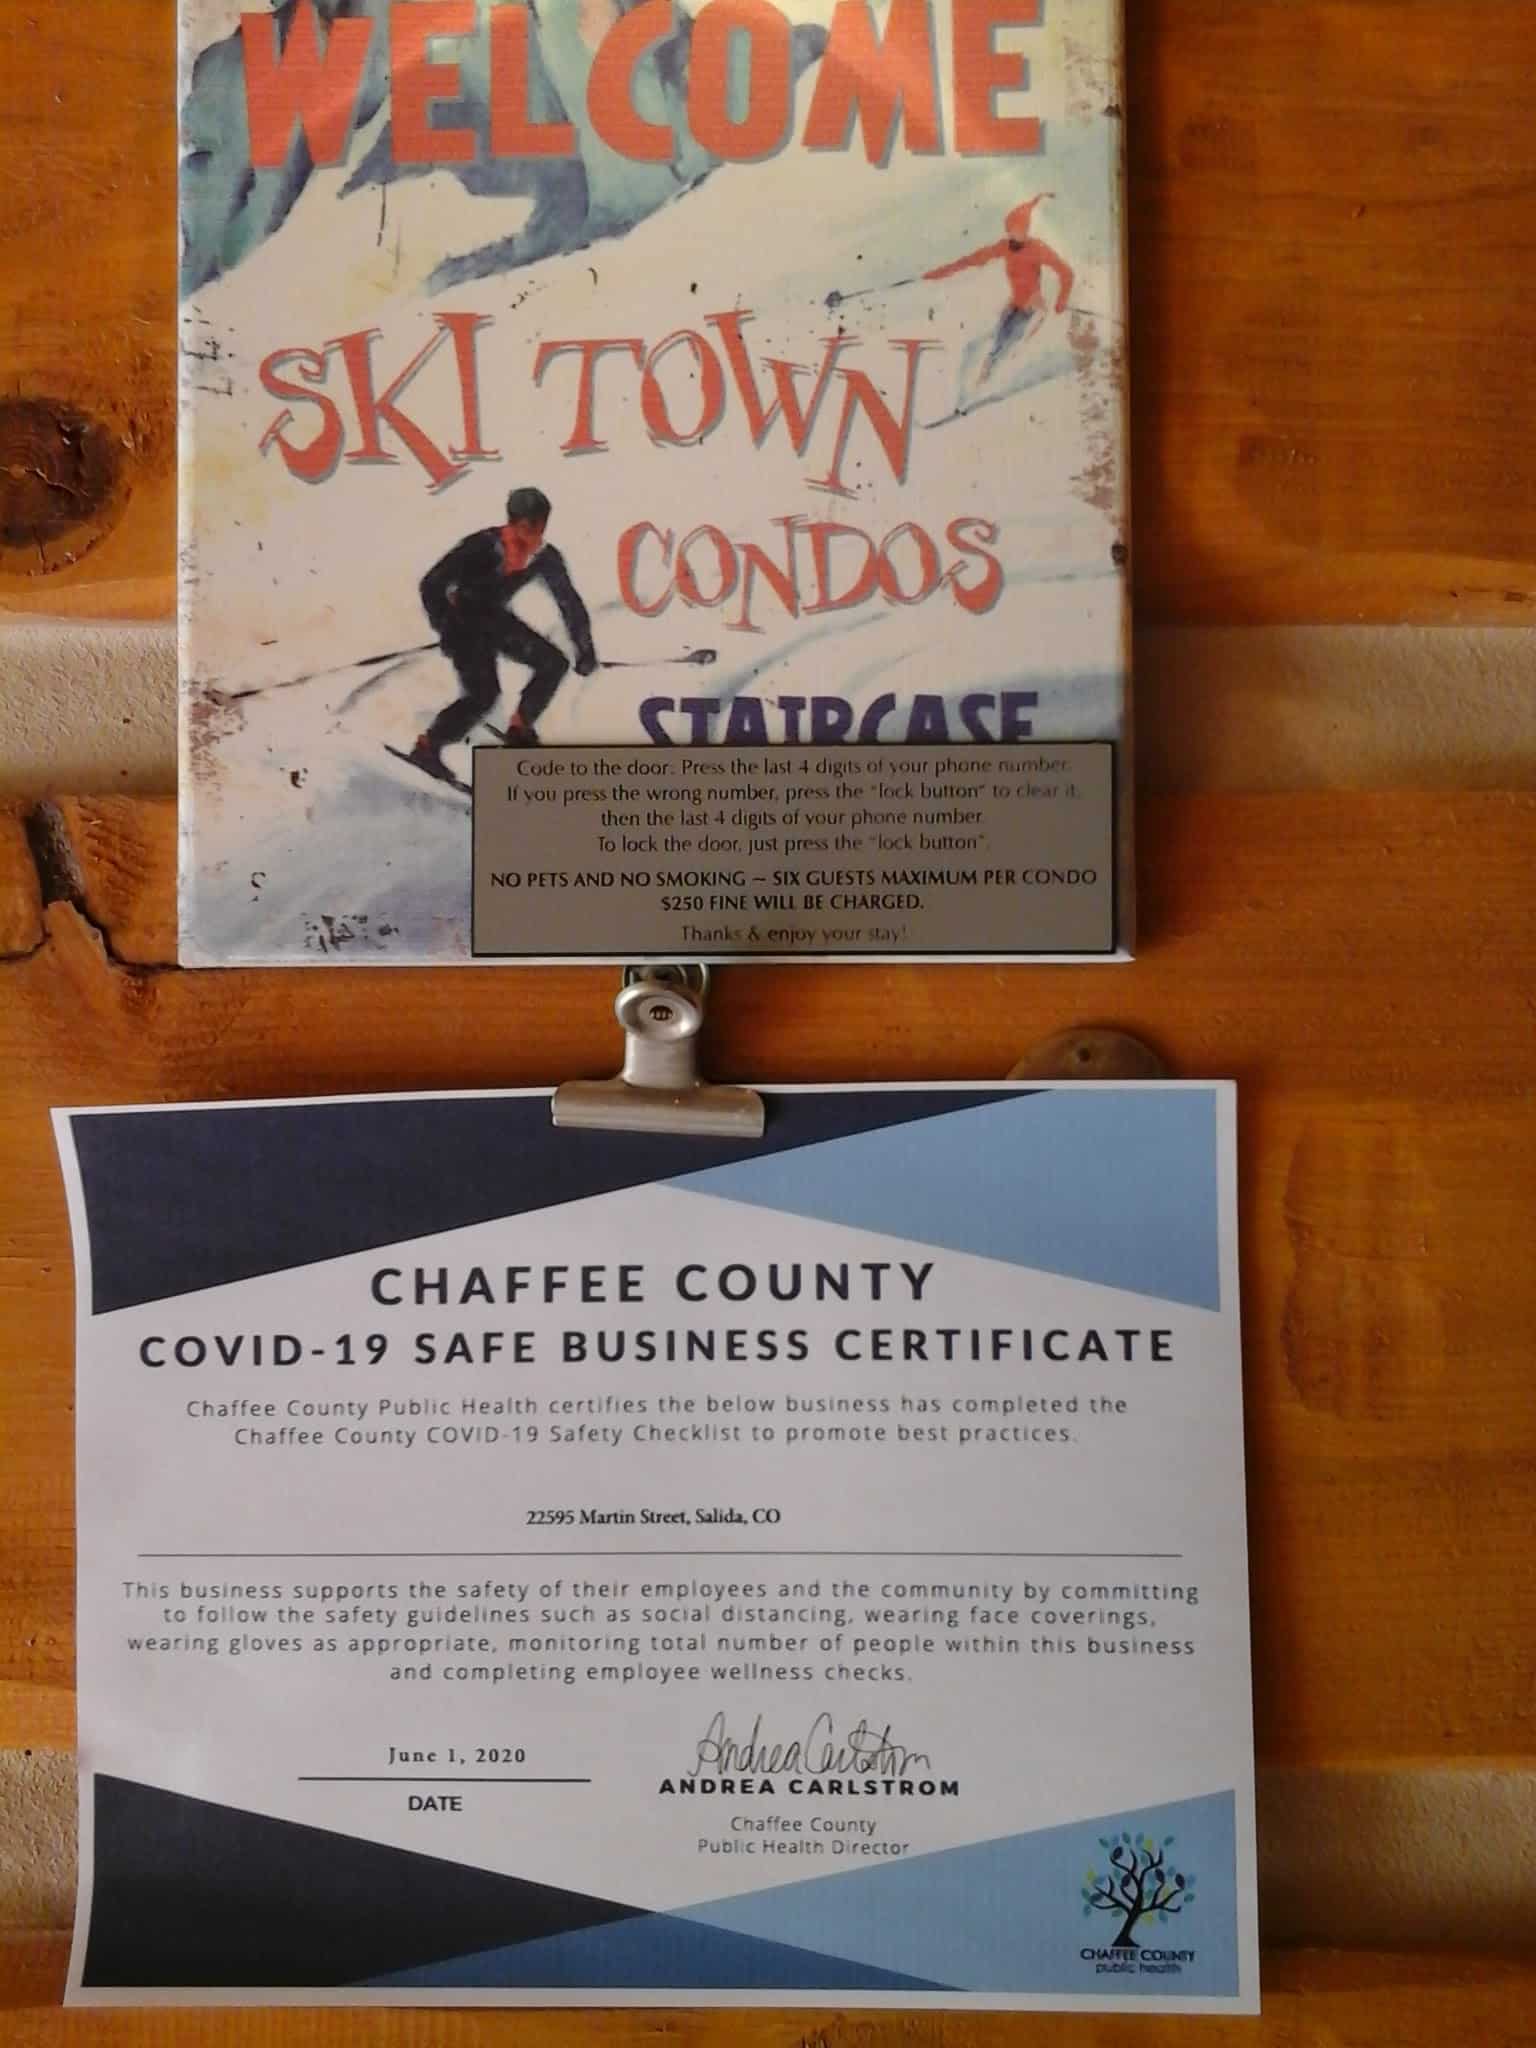 Signage posted for Ski Town Condos